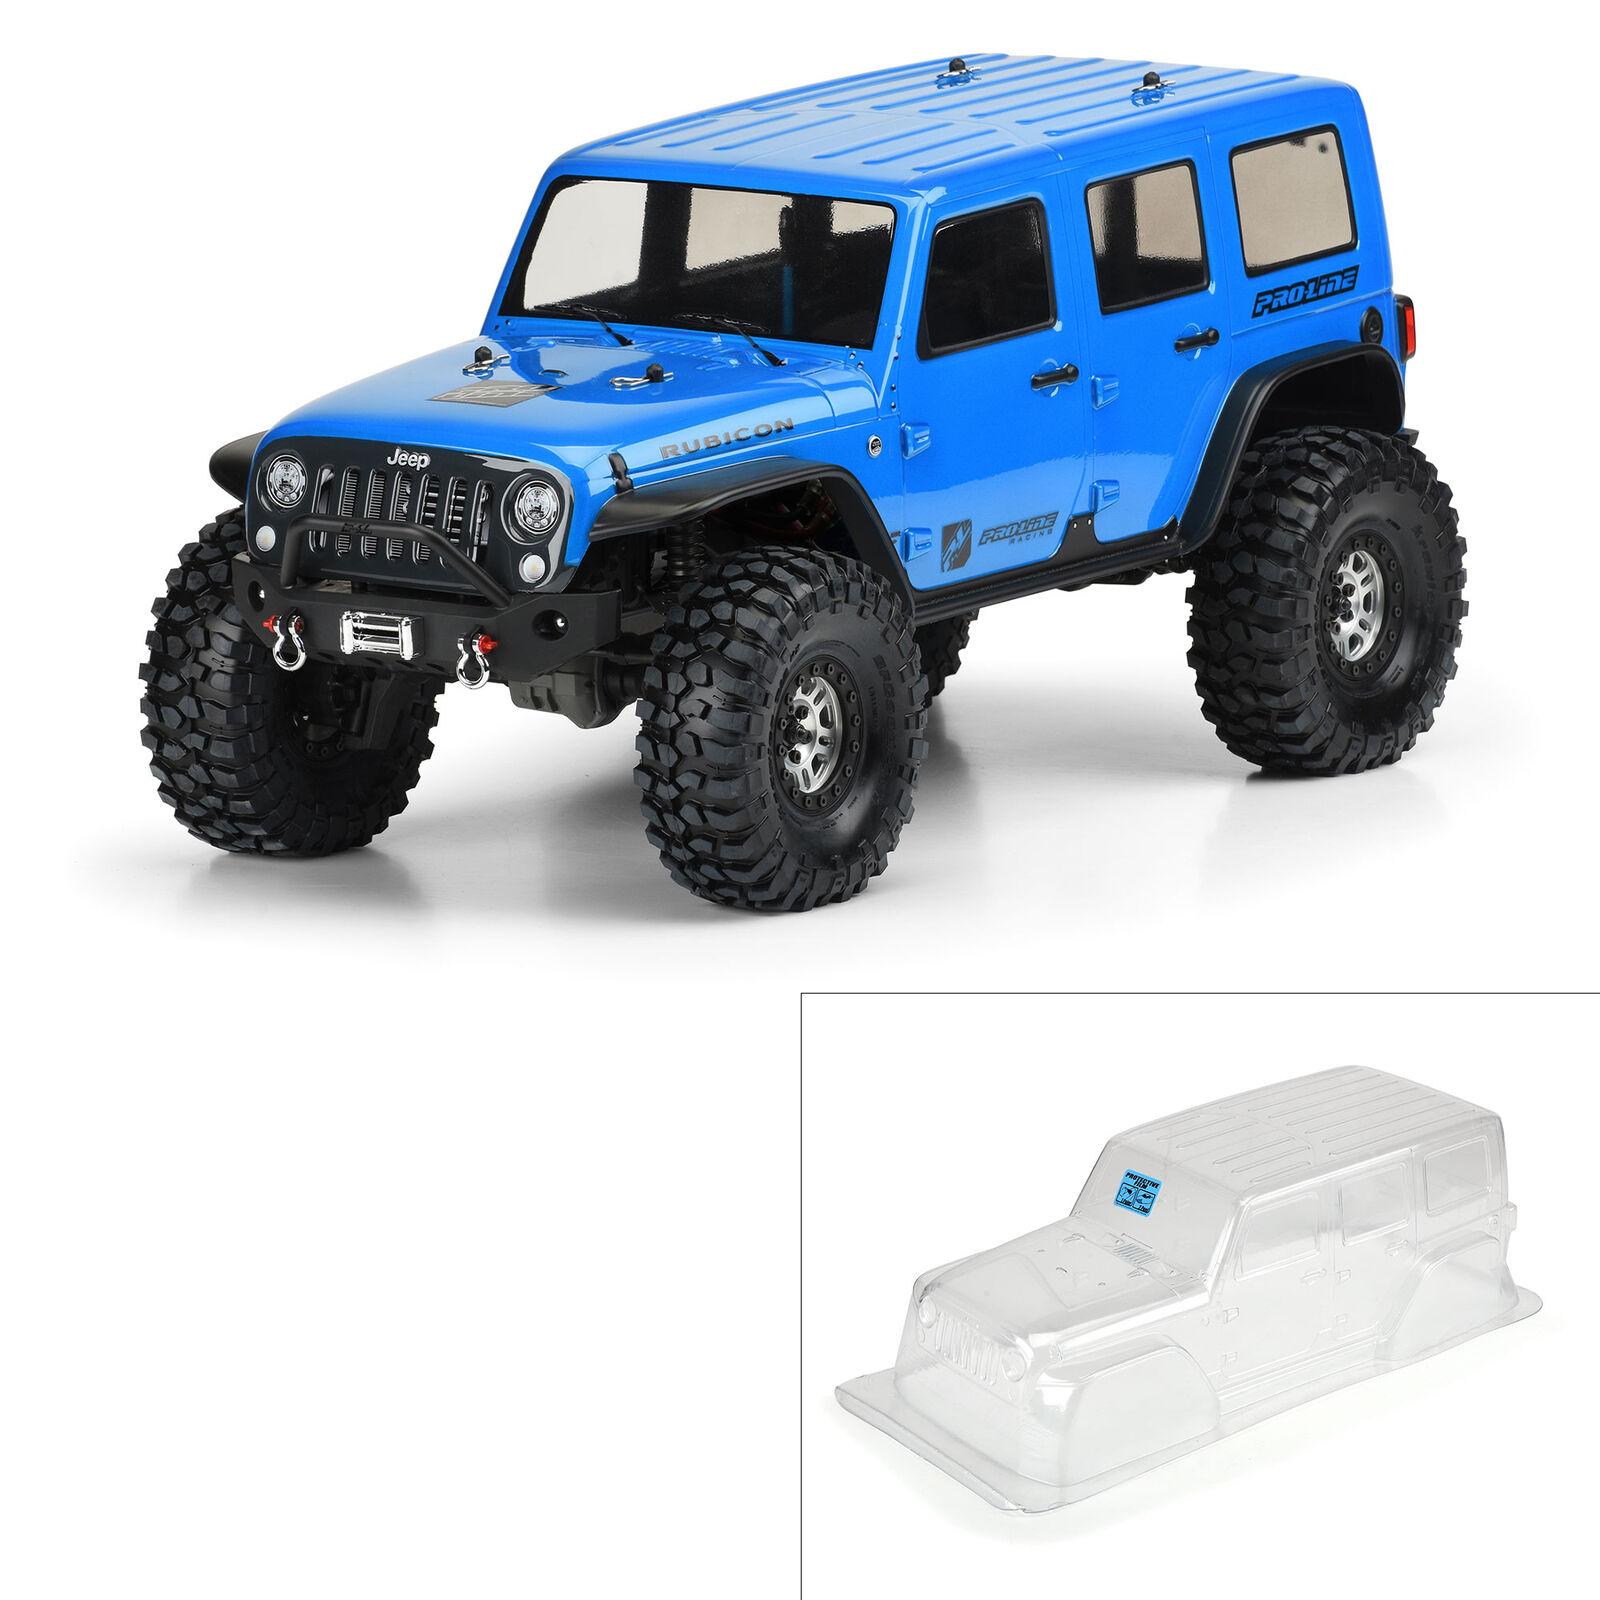 Traxxas Jeep: Customize Your Traxxas Jeep for Optimal Performance